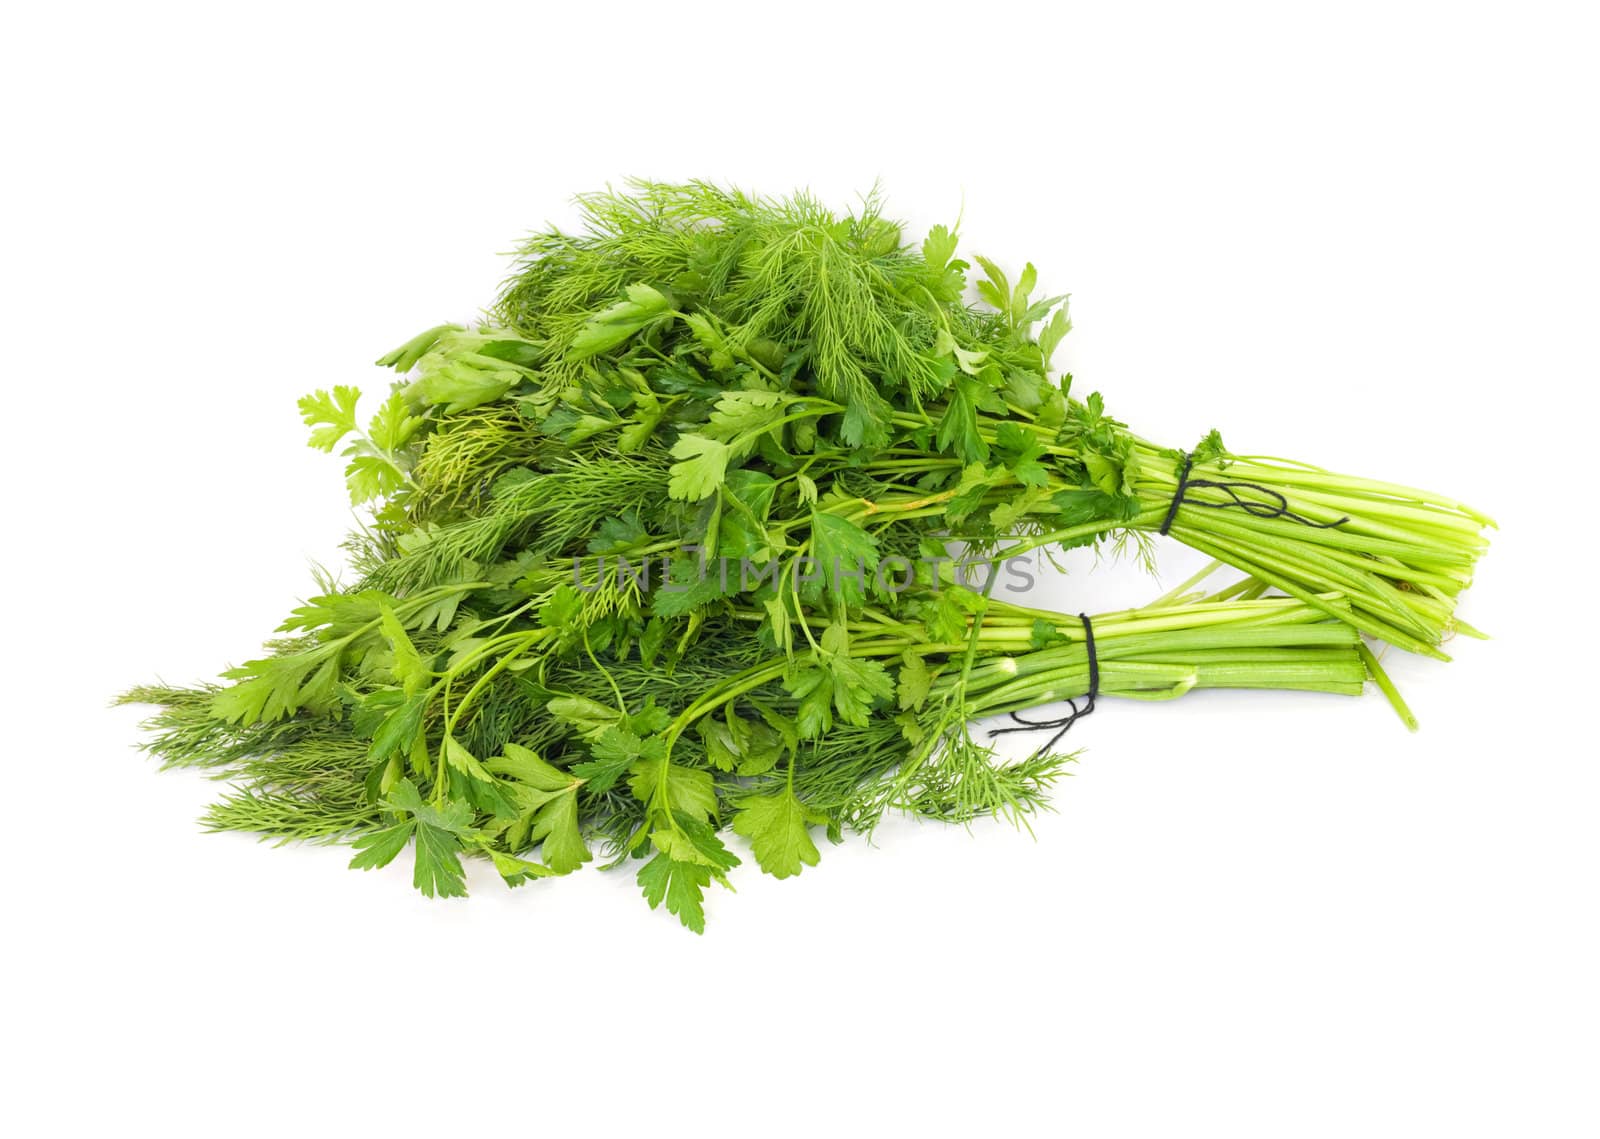 dill and parsley isolated on a white background 